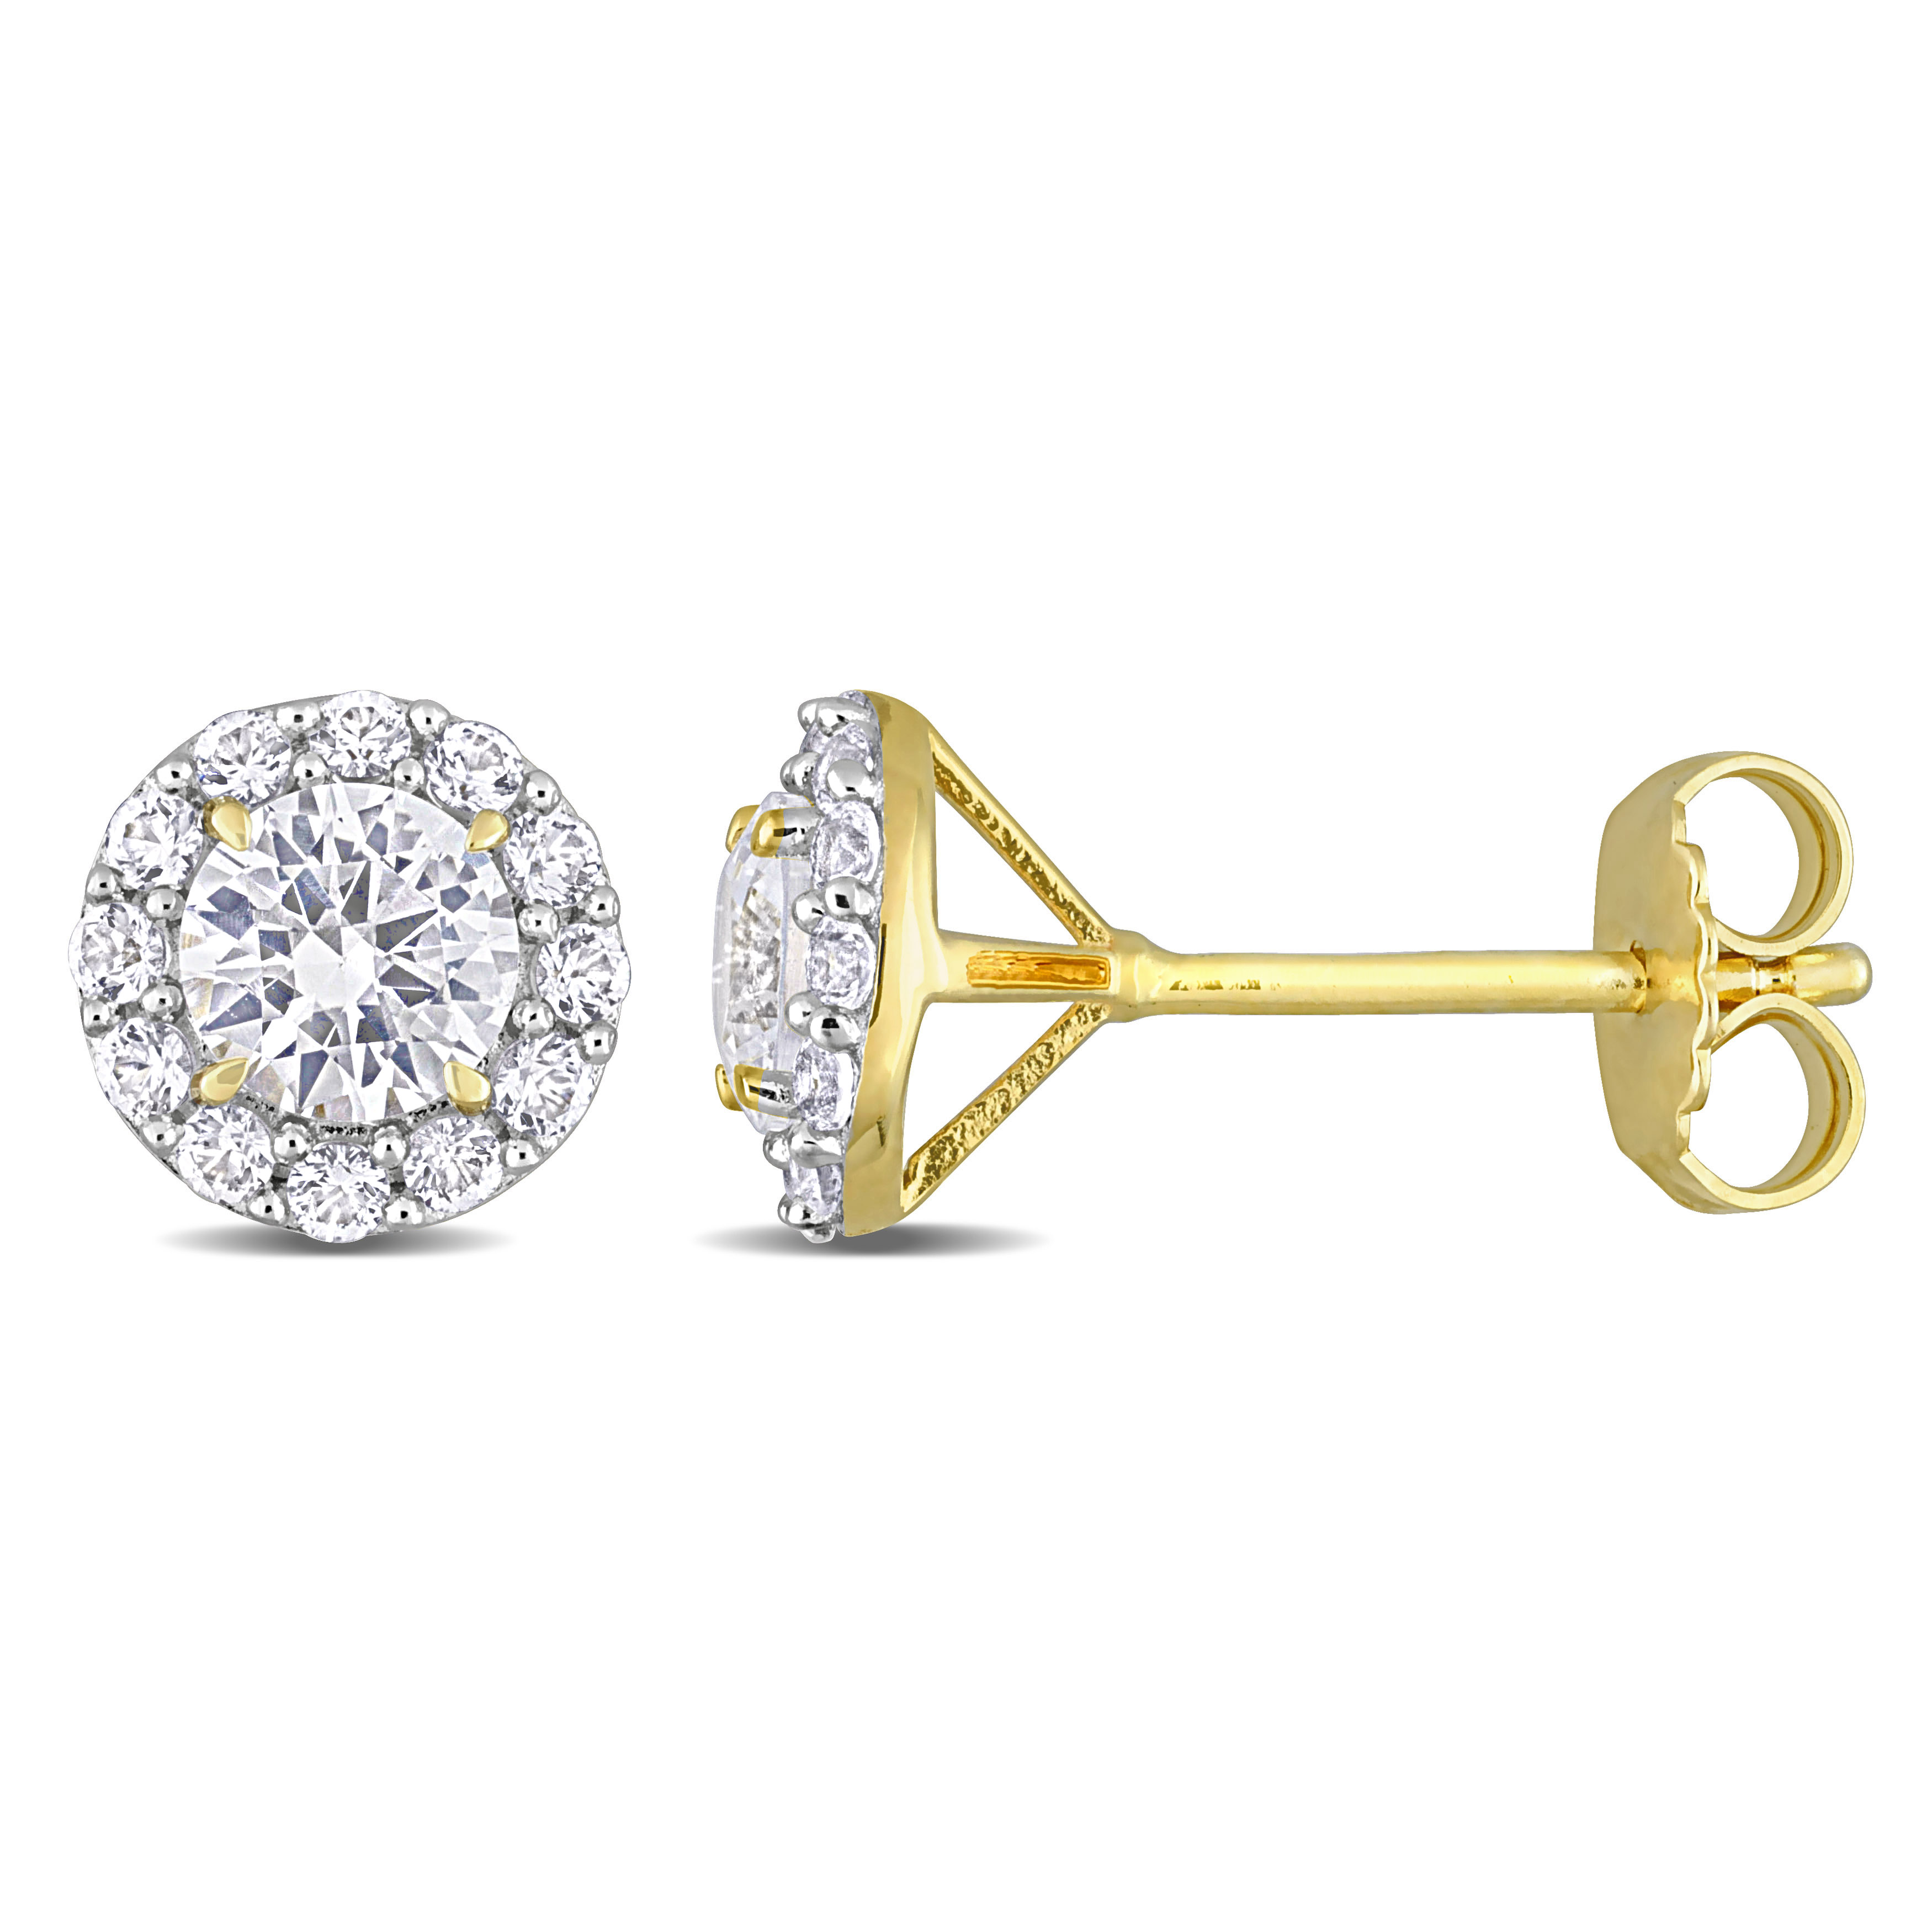 1 3/4 CT TGW Created White Sapphire Halo Stud Earrings in Yellow Plated Sterling Silver